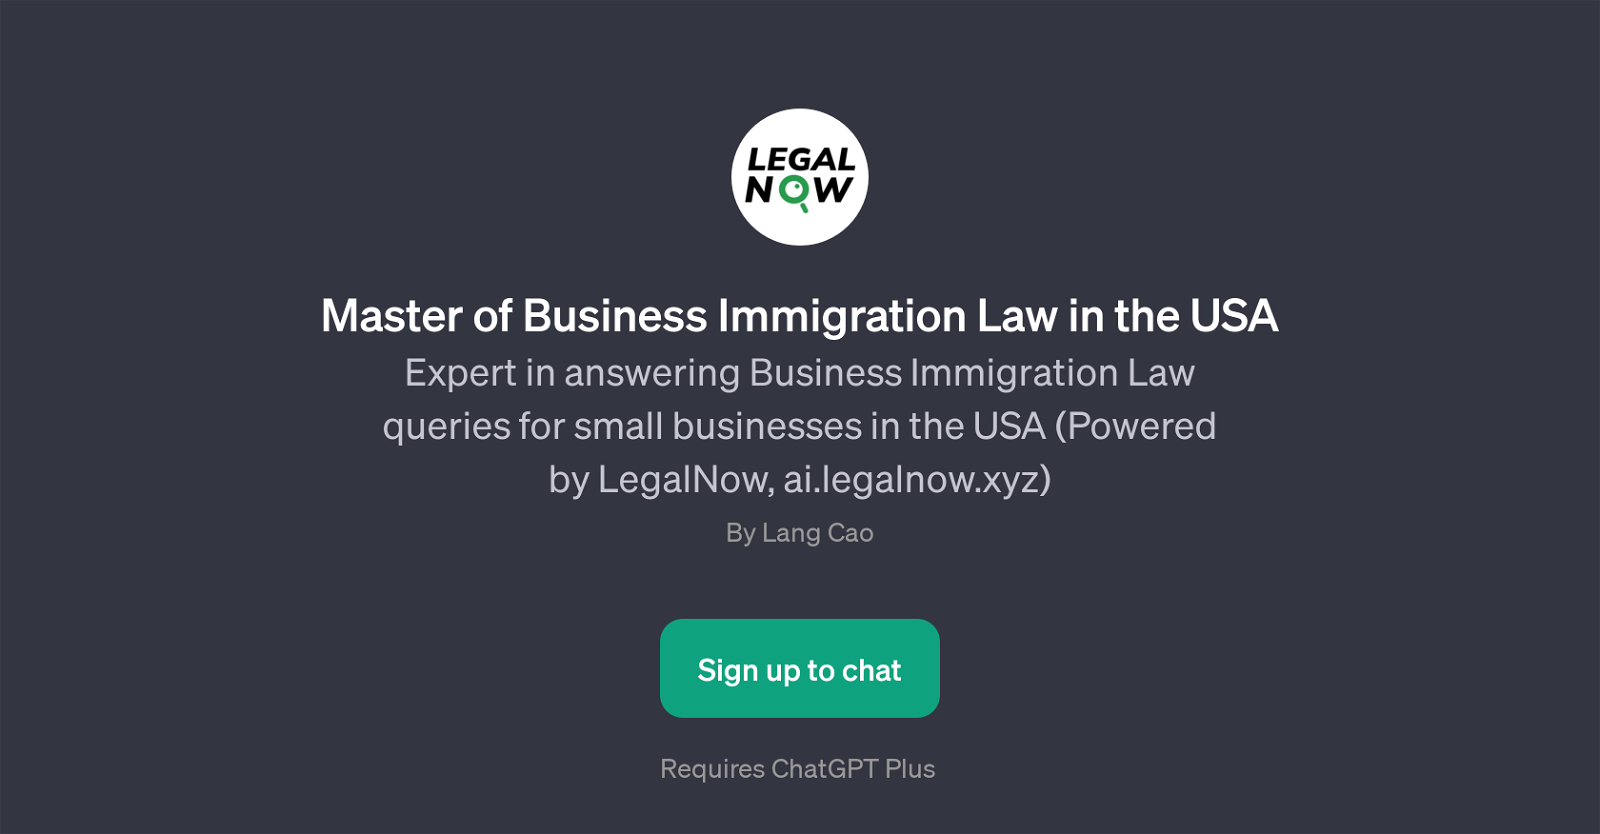 Master of Business Immigration Law in the USA website